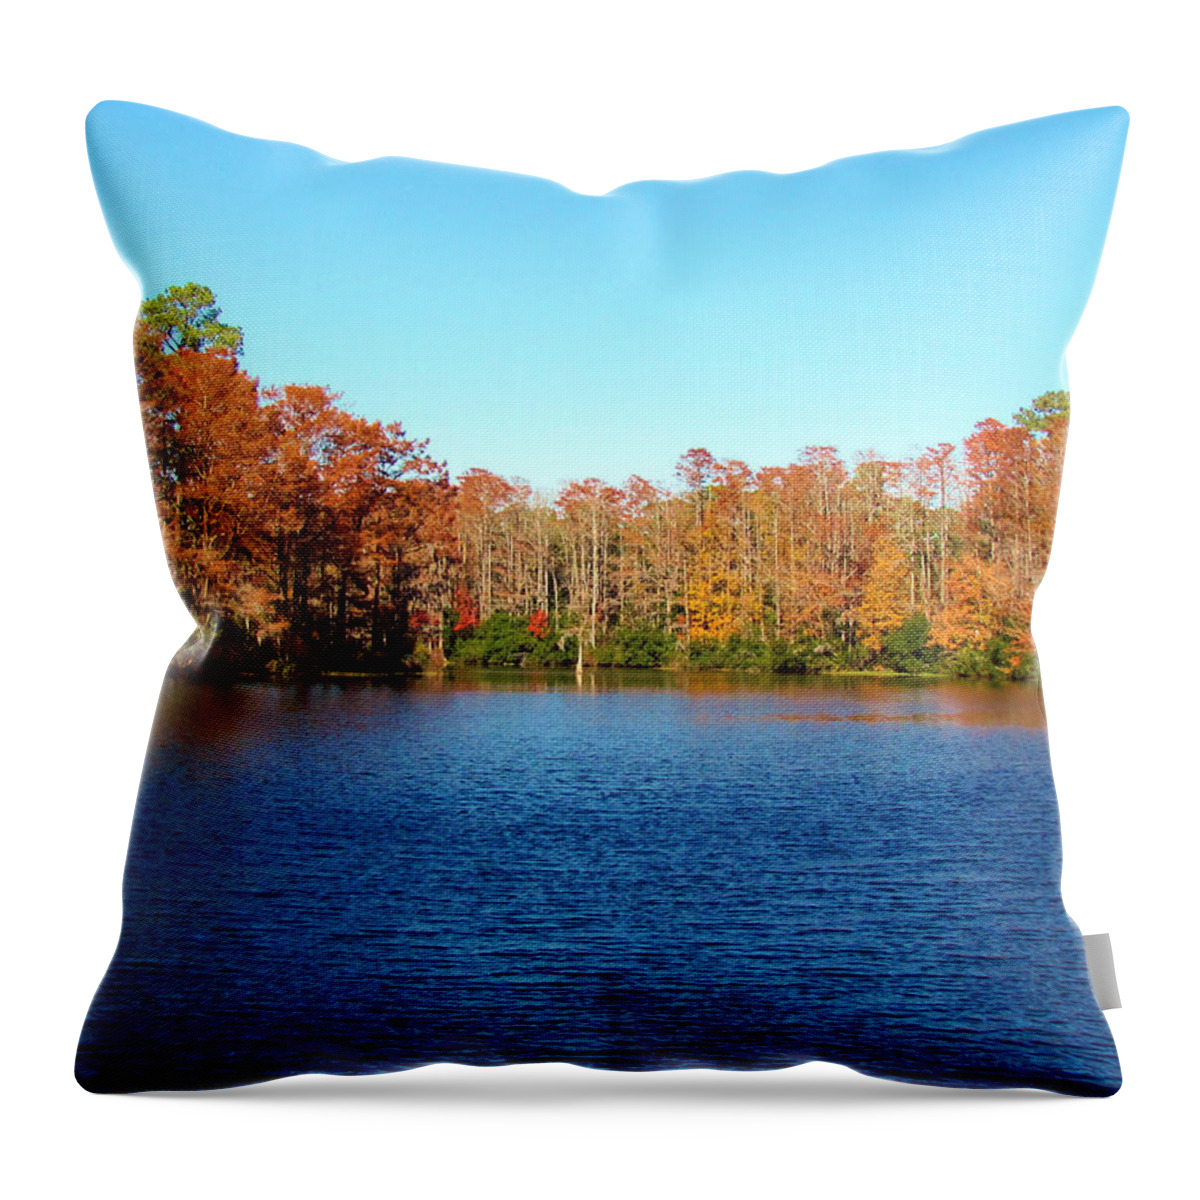 Water Throw Pillow featuring the photograph Beautiful Lake by Cynthia Guinn